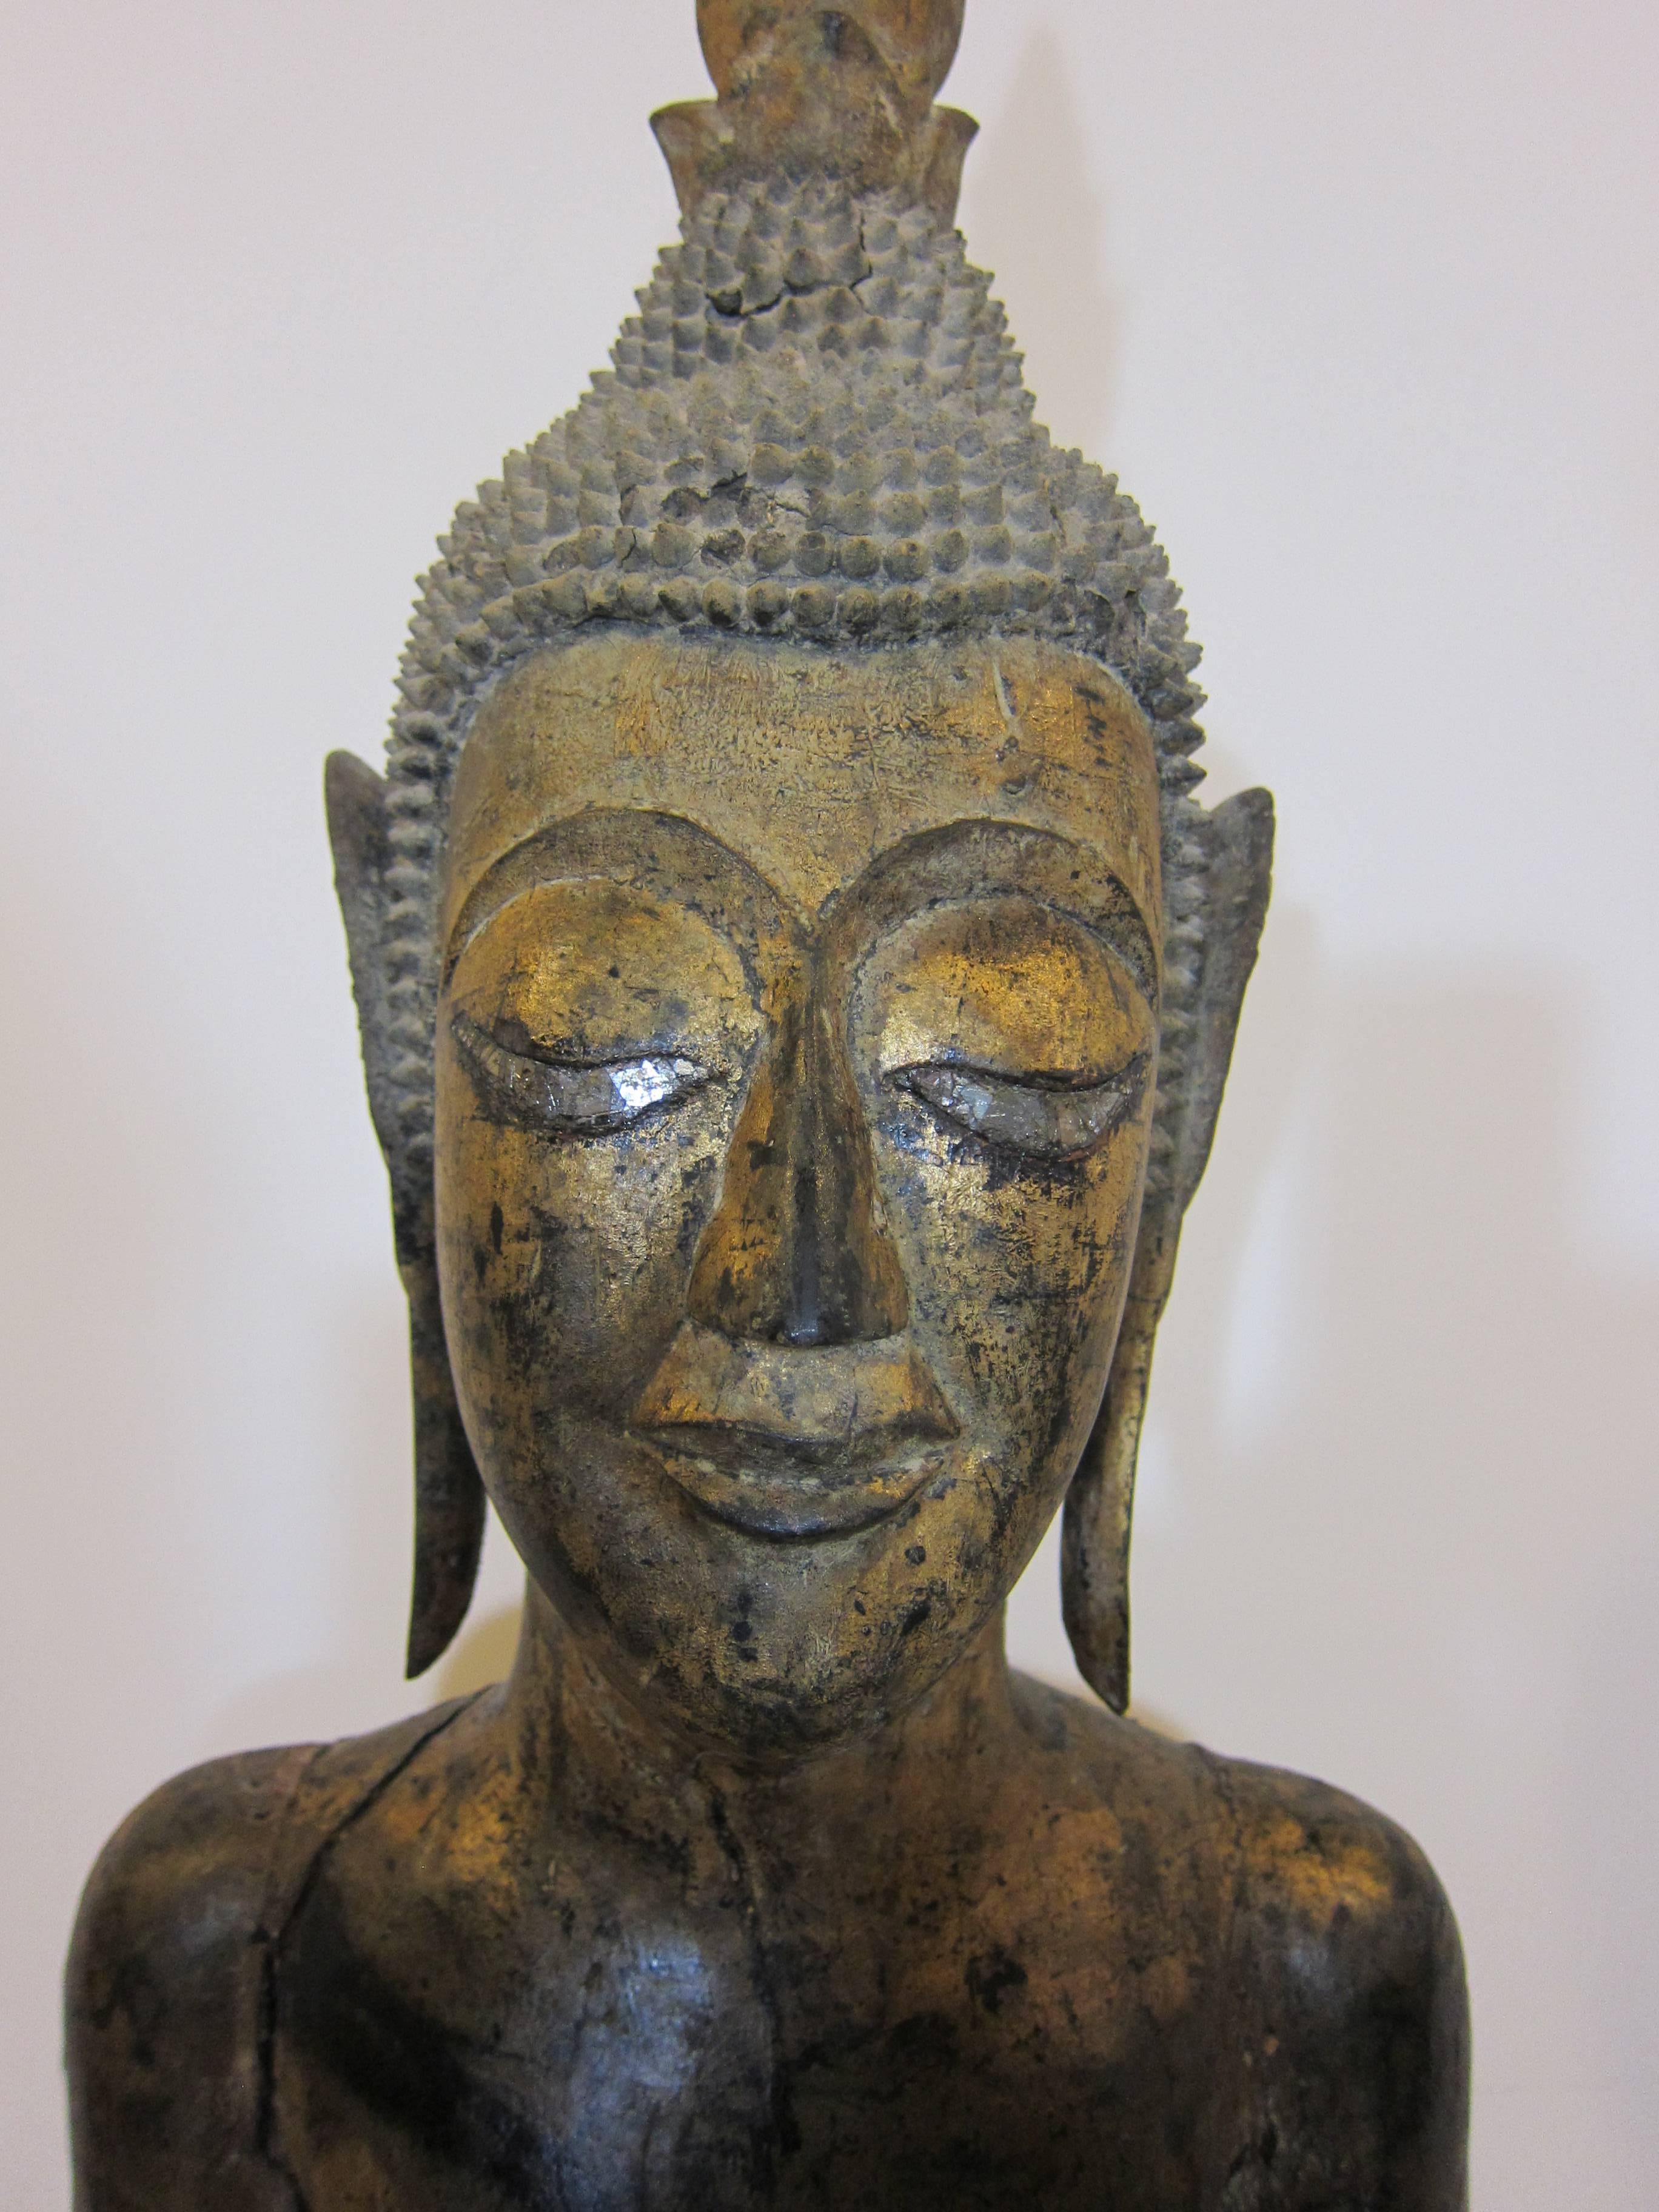 19th century Lao Buddha (Life like size). Late Era: Second period (1827-1893)
Wonderful example of Laotian Buddhist Folk Art. The art of the Lao Buddha image is considered one of the most sought after. This example wooden carved slender body